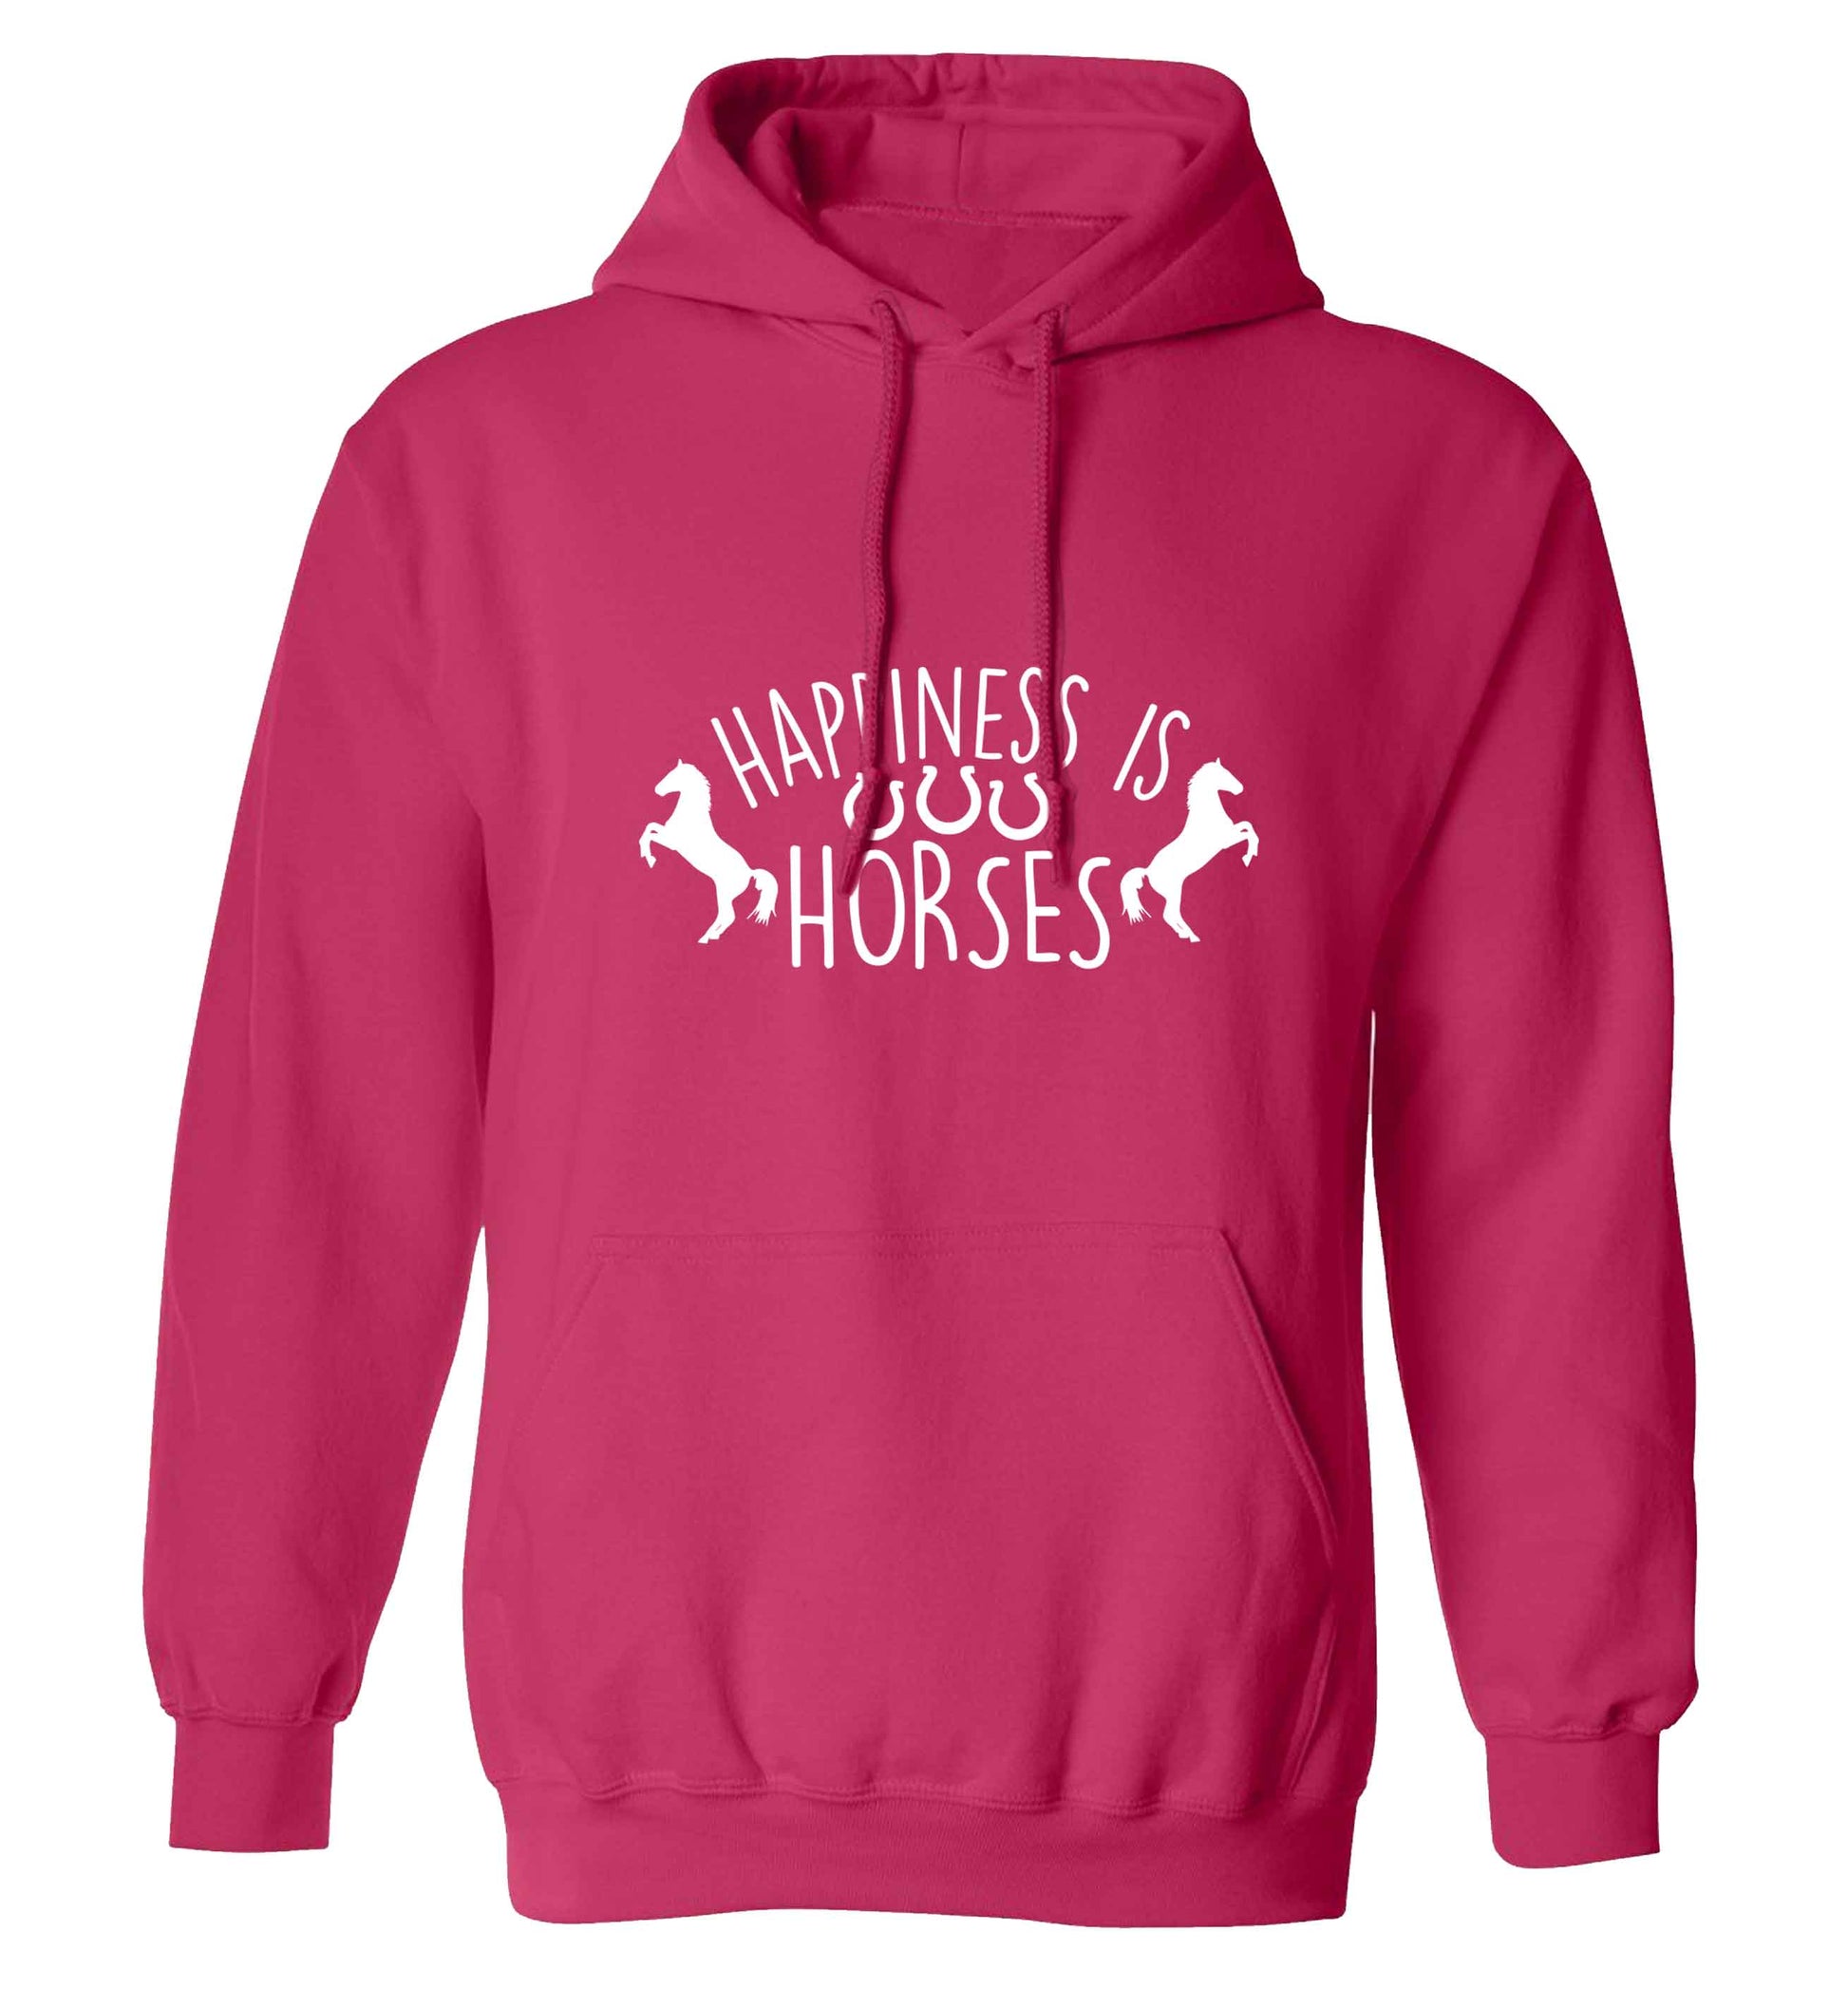 Happiness is horses adults unisex pink hoodie 2XL